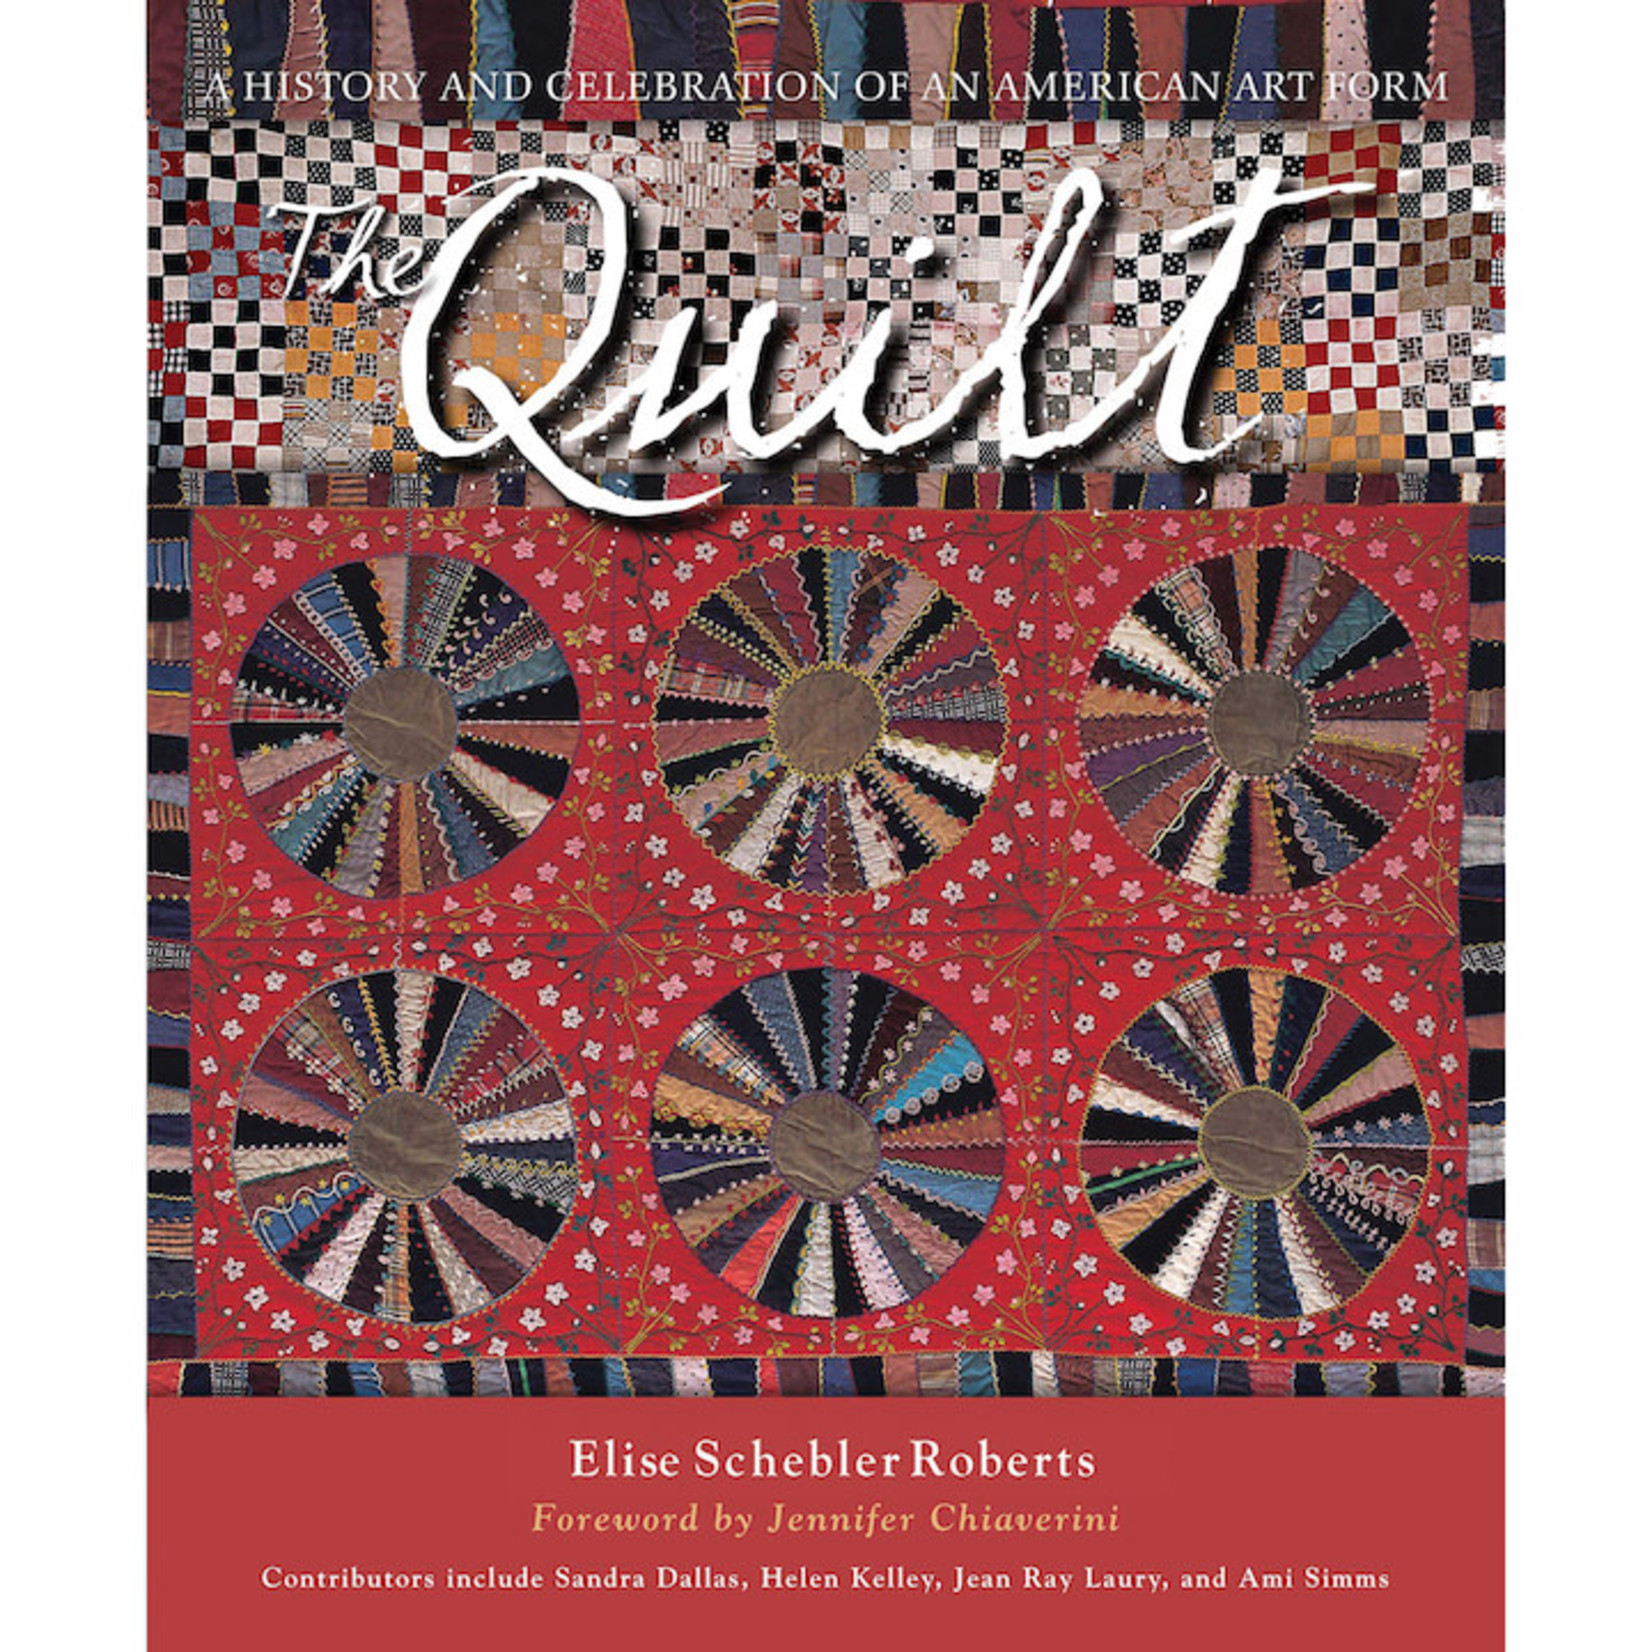 EDWARD ANDREWS The Quilt: A History and Celebration of an American Art Form